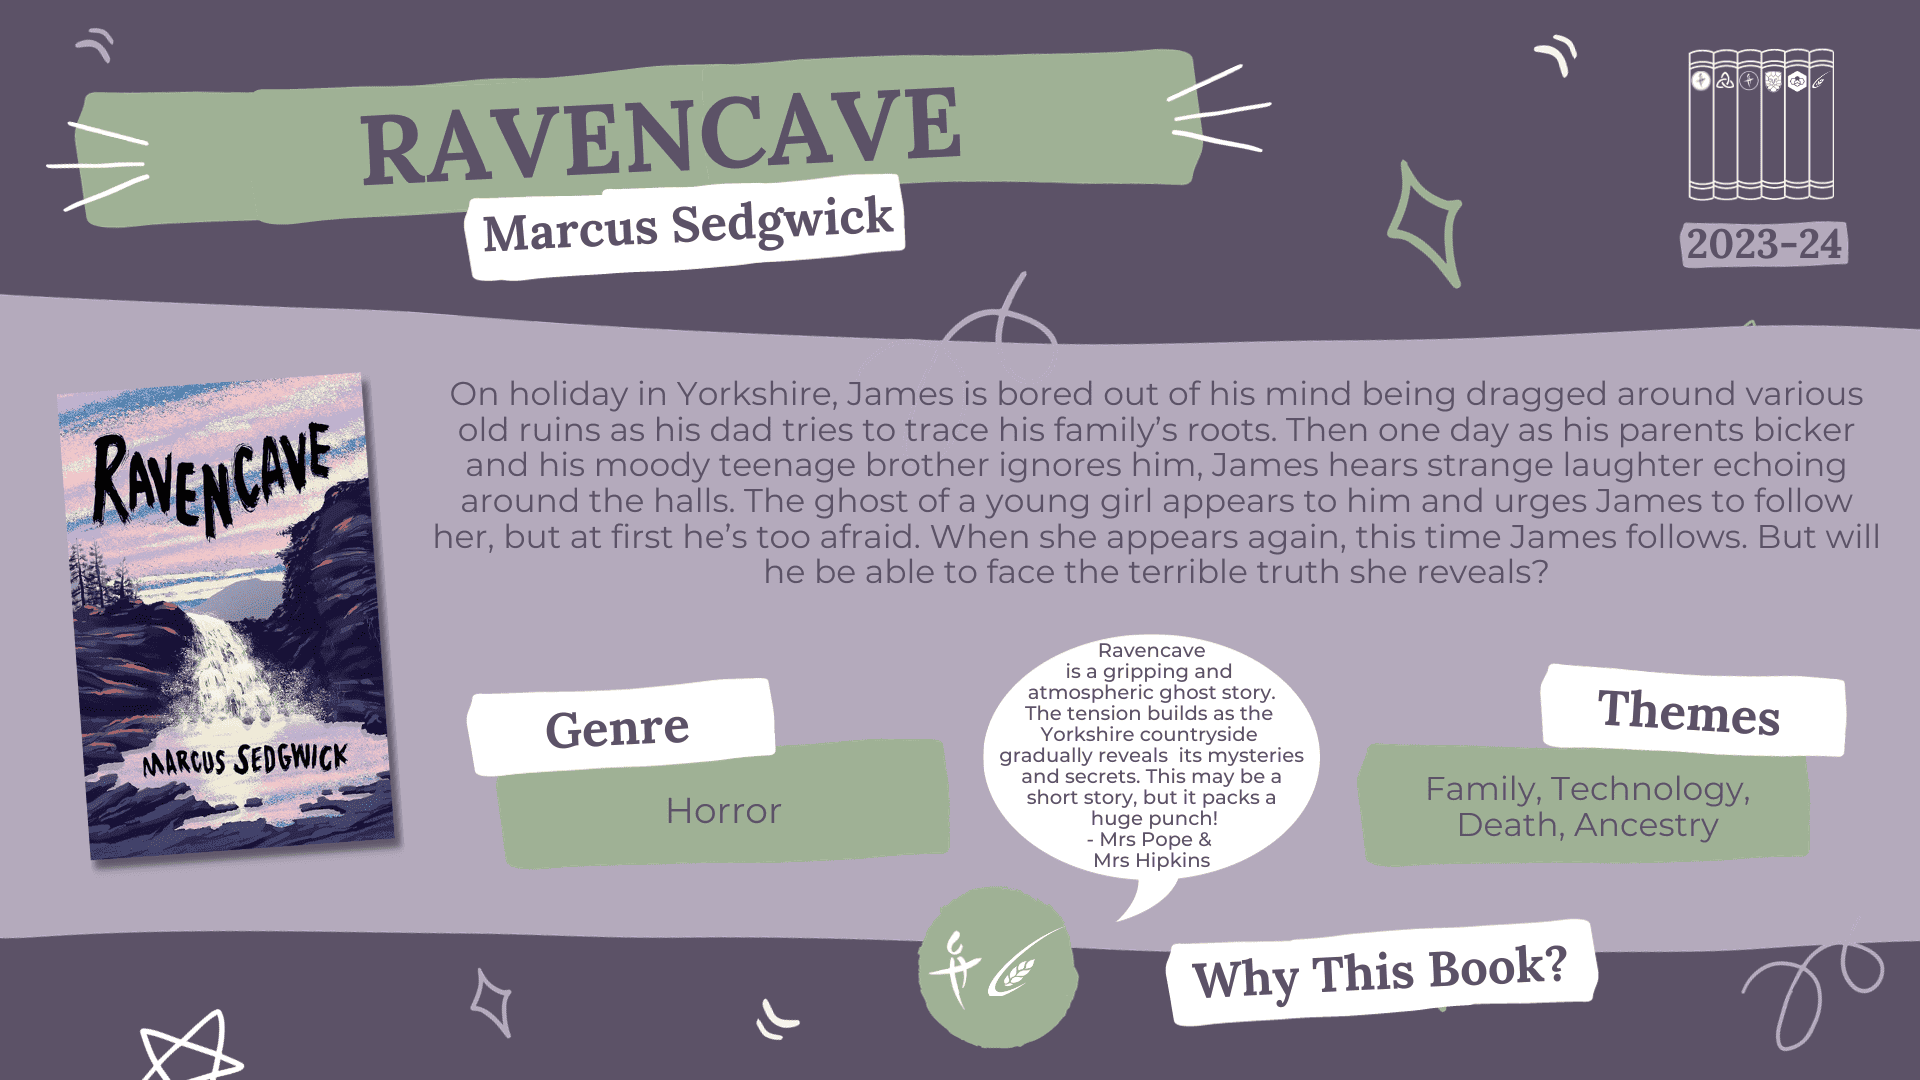  A fact card about a book nominated for the Laurus Trust Libraries Book Award 2023-2024: Ravencave by Marcus Sedgwick Blurb reads: On holiday in Yorkshire, James is bored out of his mind being dragged around various old ruins as his dad tries to trace his family's roots. Then one day as his parents bicker and his moody teenage brother ignores him, James hears strange laughter echoing around the halls. The ghost of a young girl appears to him and urges James to follow her, but at first he's too afraid. When she appears again, this time James follows. But will he be able to face the terrible truth she reveals? Genre: Horror Themes: Family, Technology, Death, Ancestry Why this book? Ravencave is a gripping and atmospheric ghost story. The tension builds as the Yorkshire countryside gradually reveals its mysteries and secrets. This may be a short story, but it packs a huge punch! - Mrs Pope (LCH) & Mrs Hipkins (PRS)